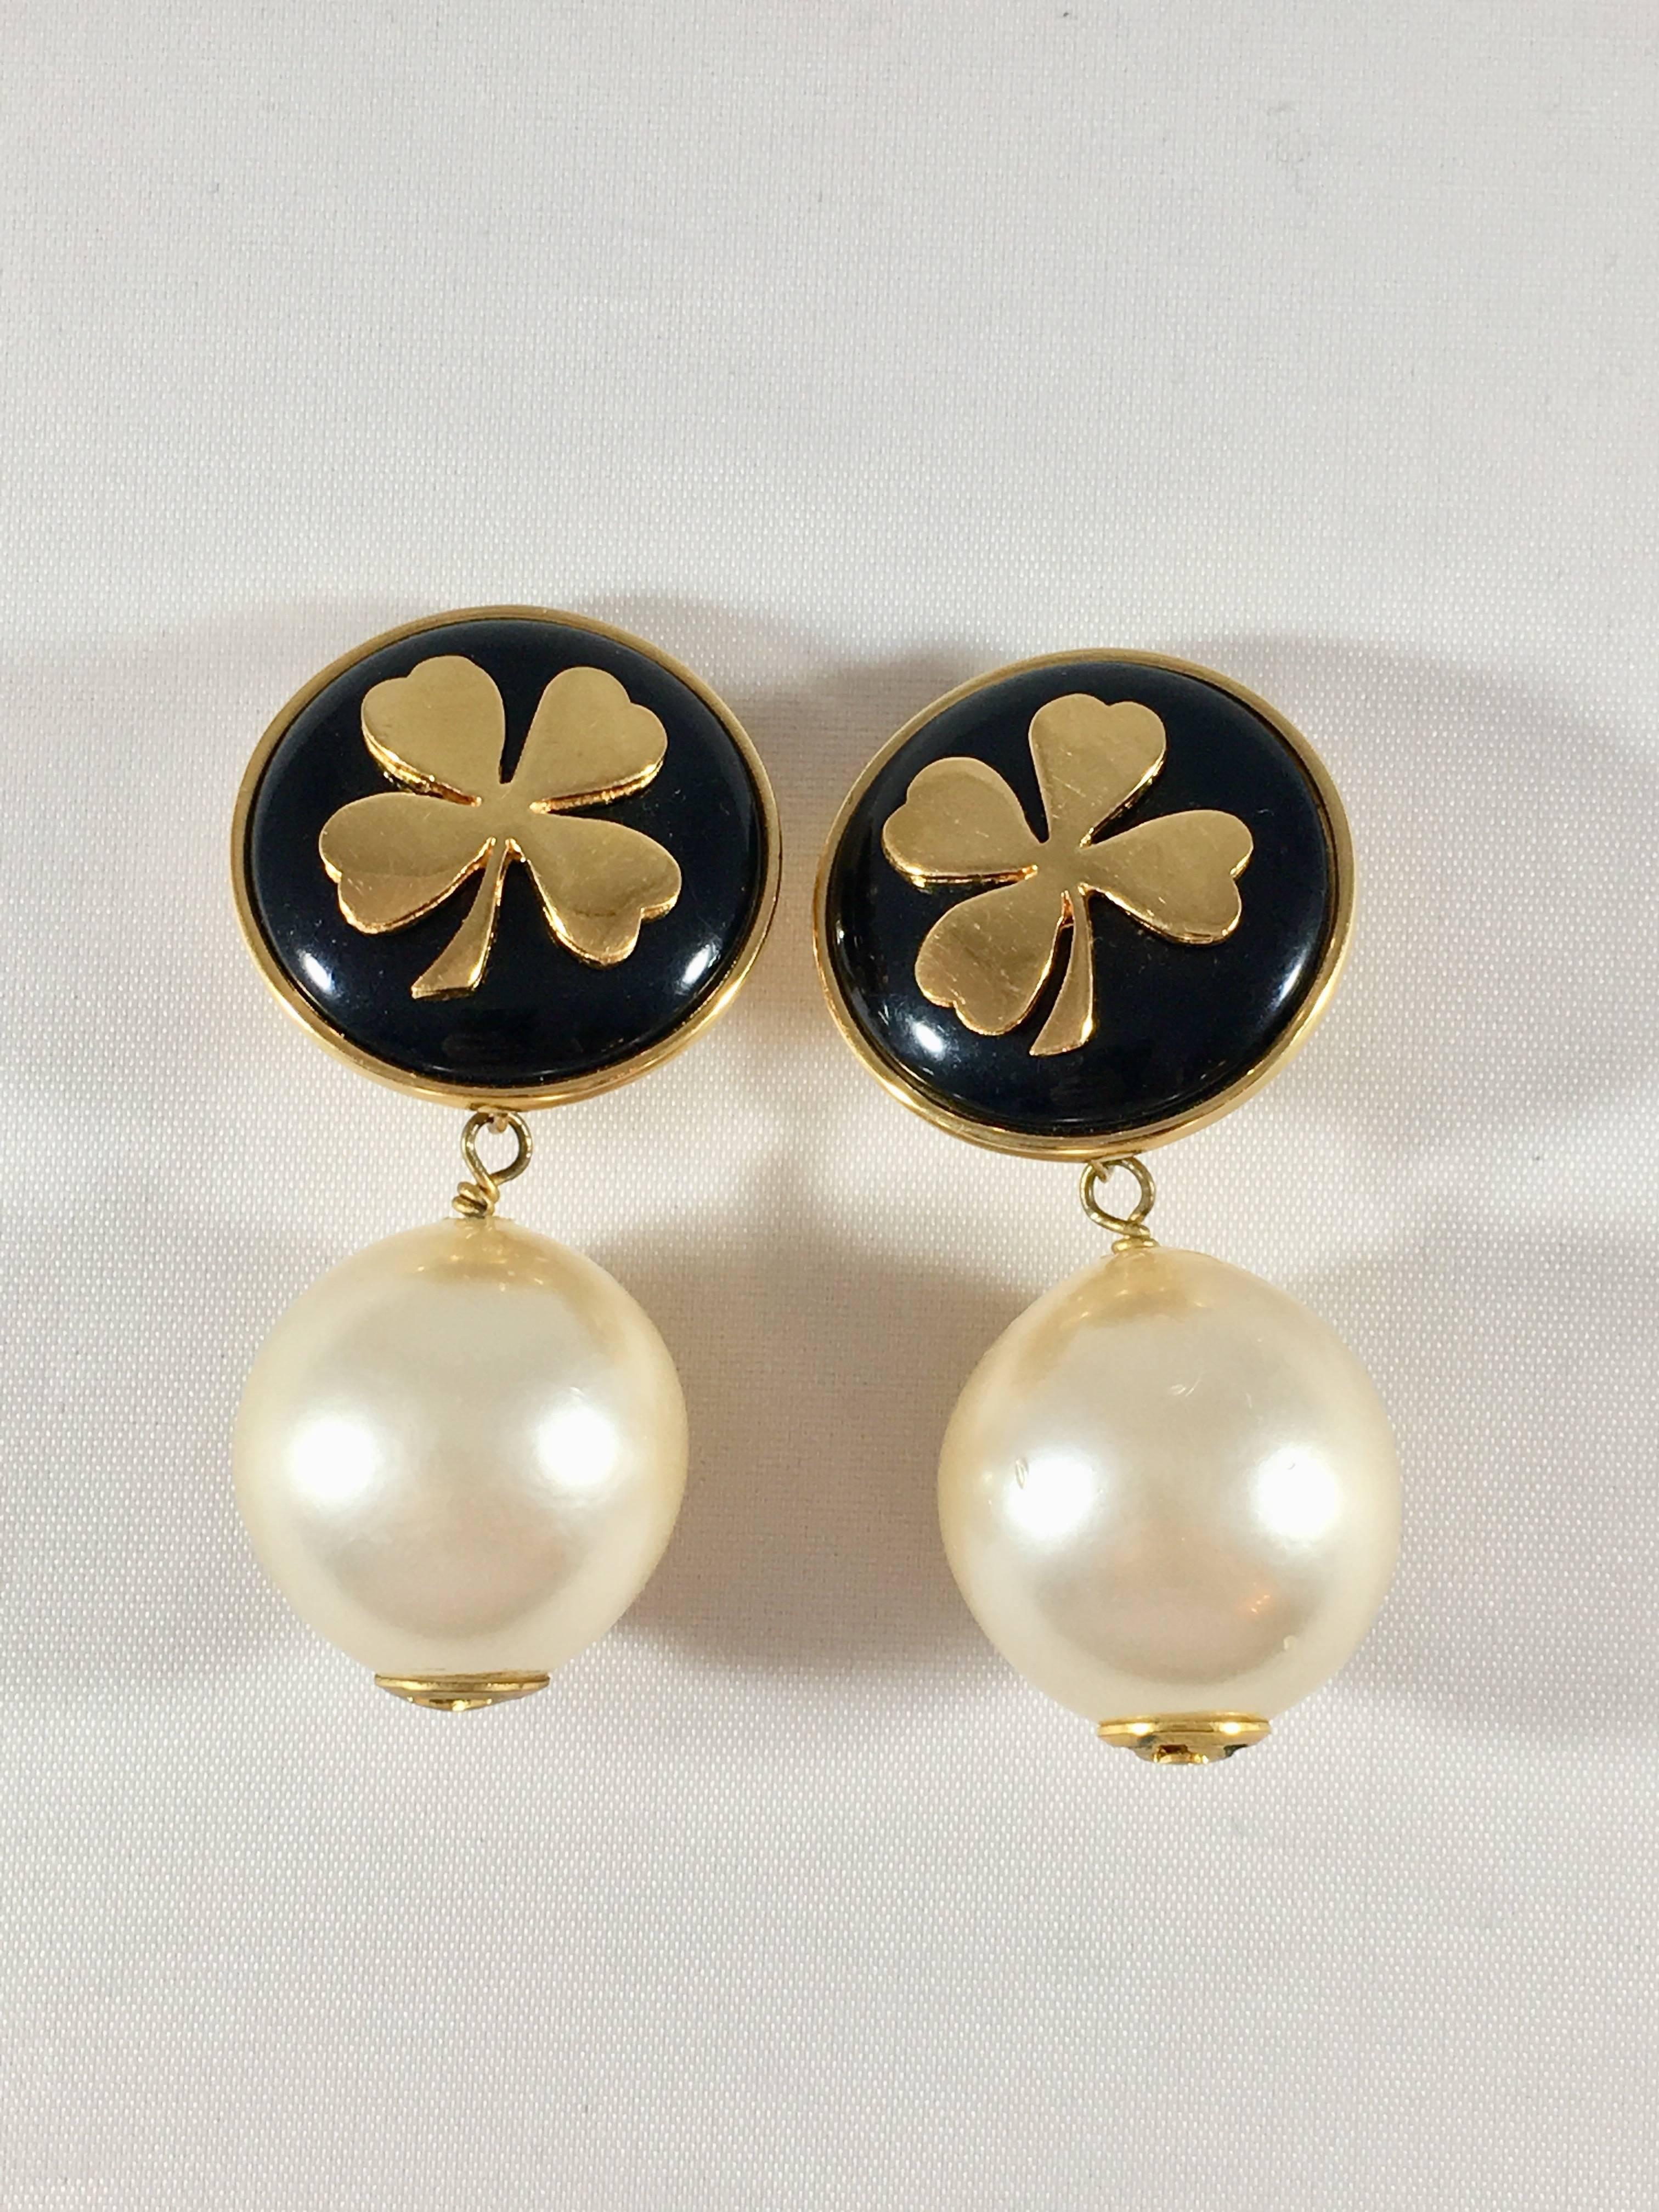 These are a fabulous pair of 1970s Chanel earrings featuring a large round faux pearl hanging from a piece embellished with a gold clover set in a black resin background. The clover is a symbol that was often used by Chanel. It was one of the